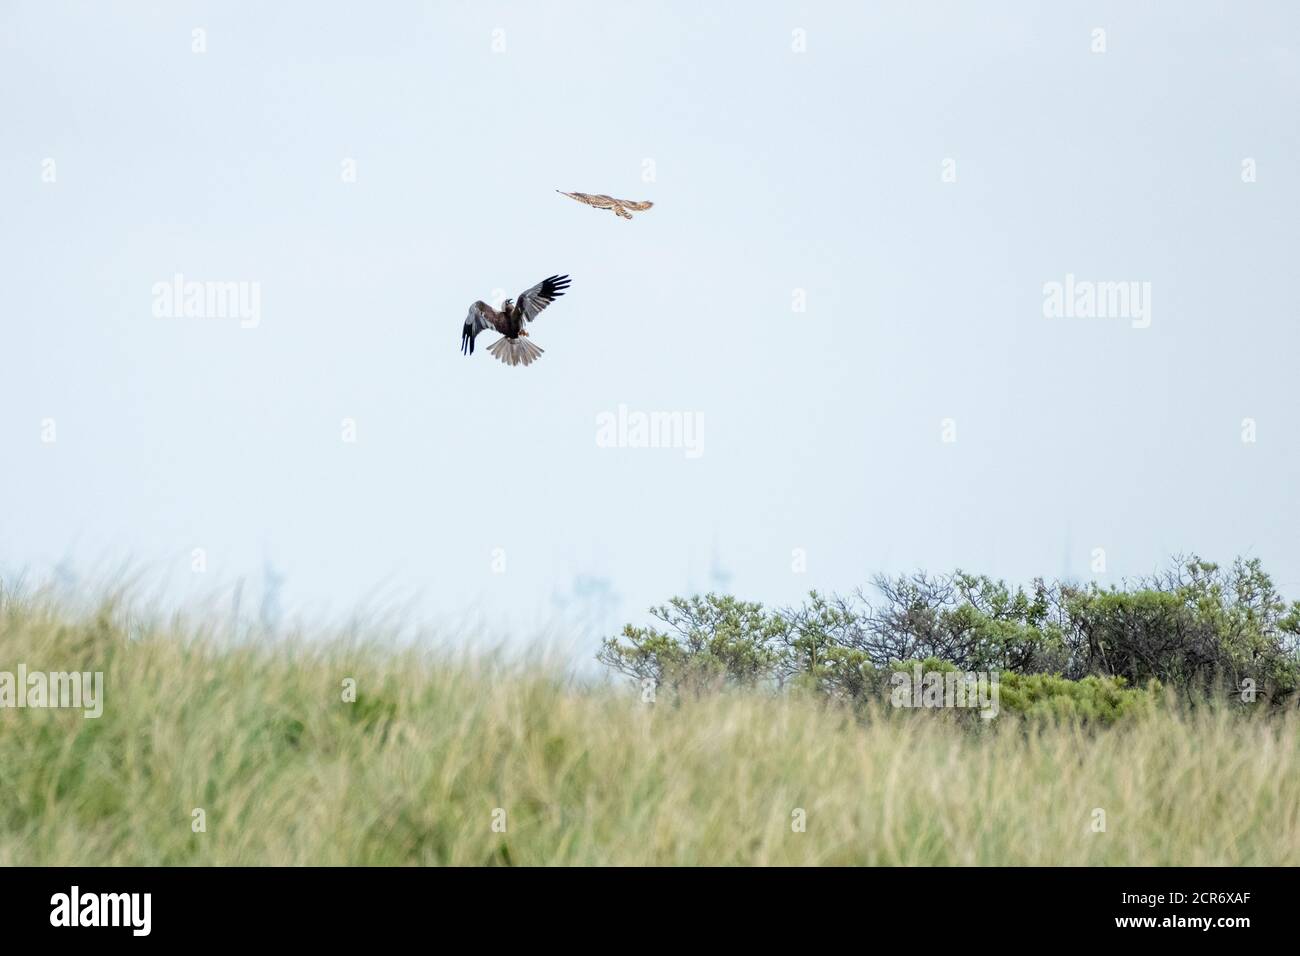 Germany, Lower Saxony, Juist, Marsh Harrier (Circus aeruginosus), in a dogfight with a short-eared owl. Stock Photo